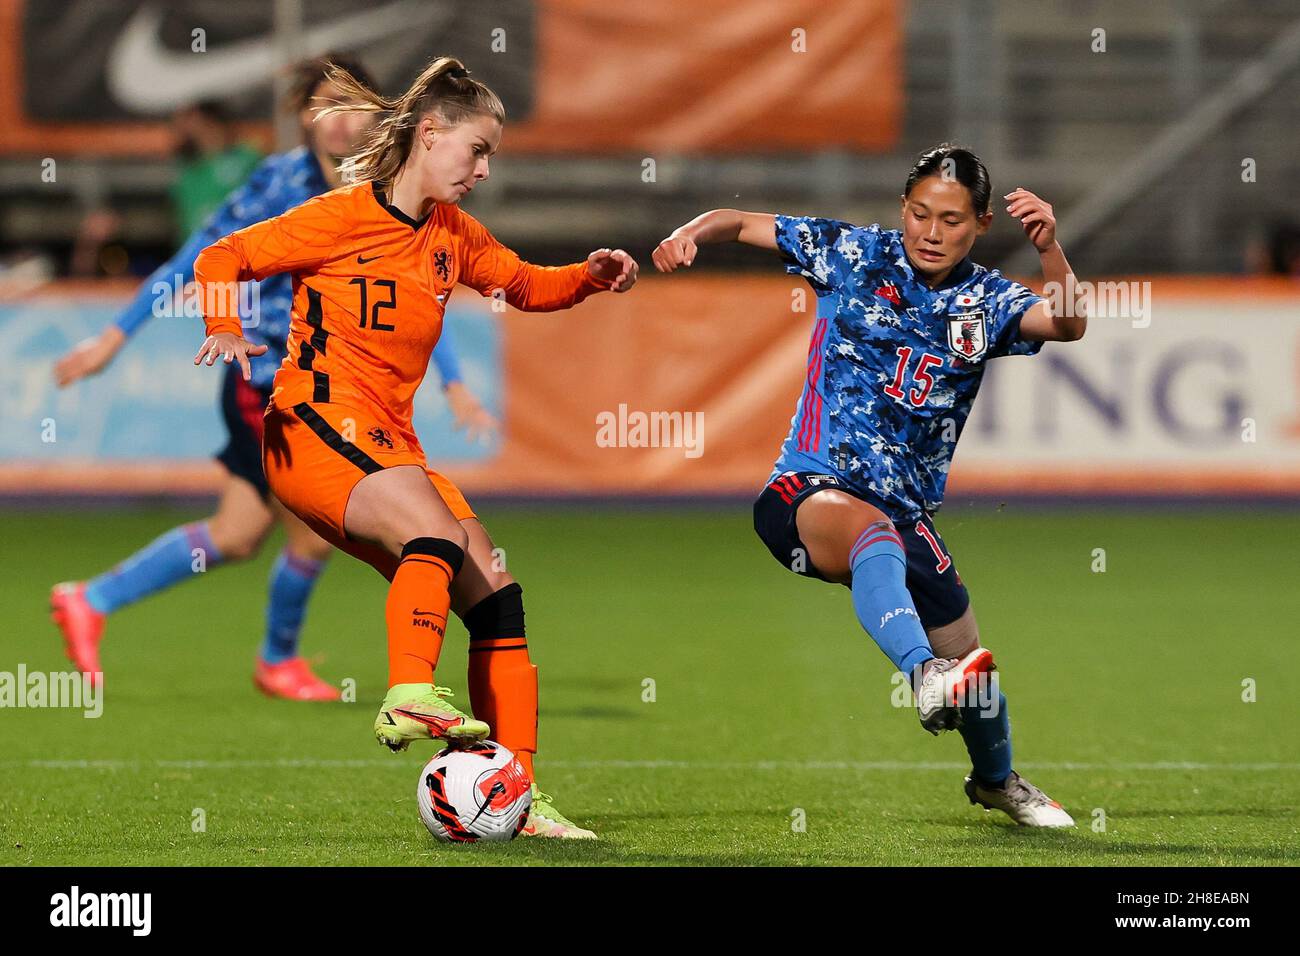 DEN HAAG, NETHERLANDS - NOVEMBER 29: Victoria Pelova of the Netherlands,  Fuka Nagano of Japan during the Friendly match between The Netherlands  Women and Japan Women at Cars Jeans Stadion on November